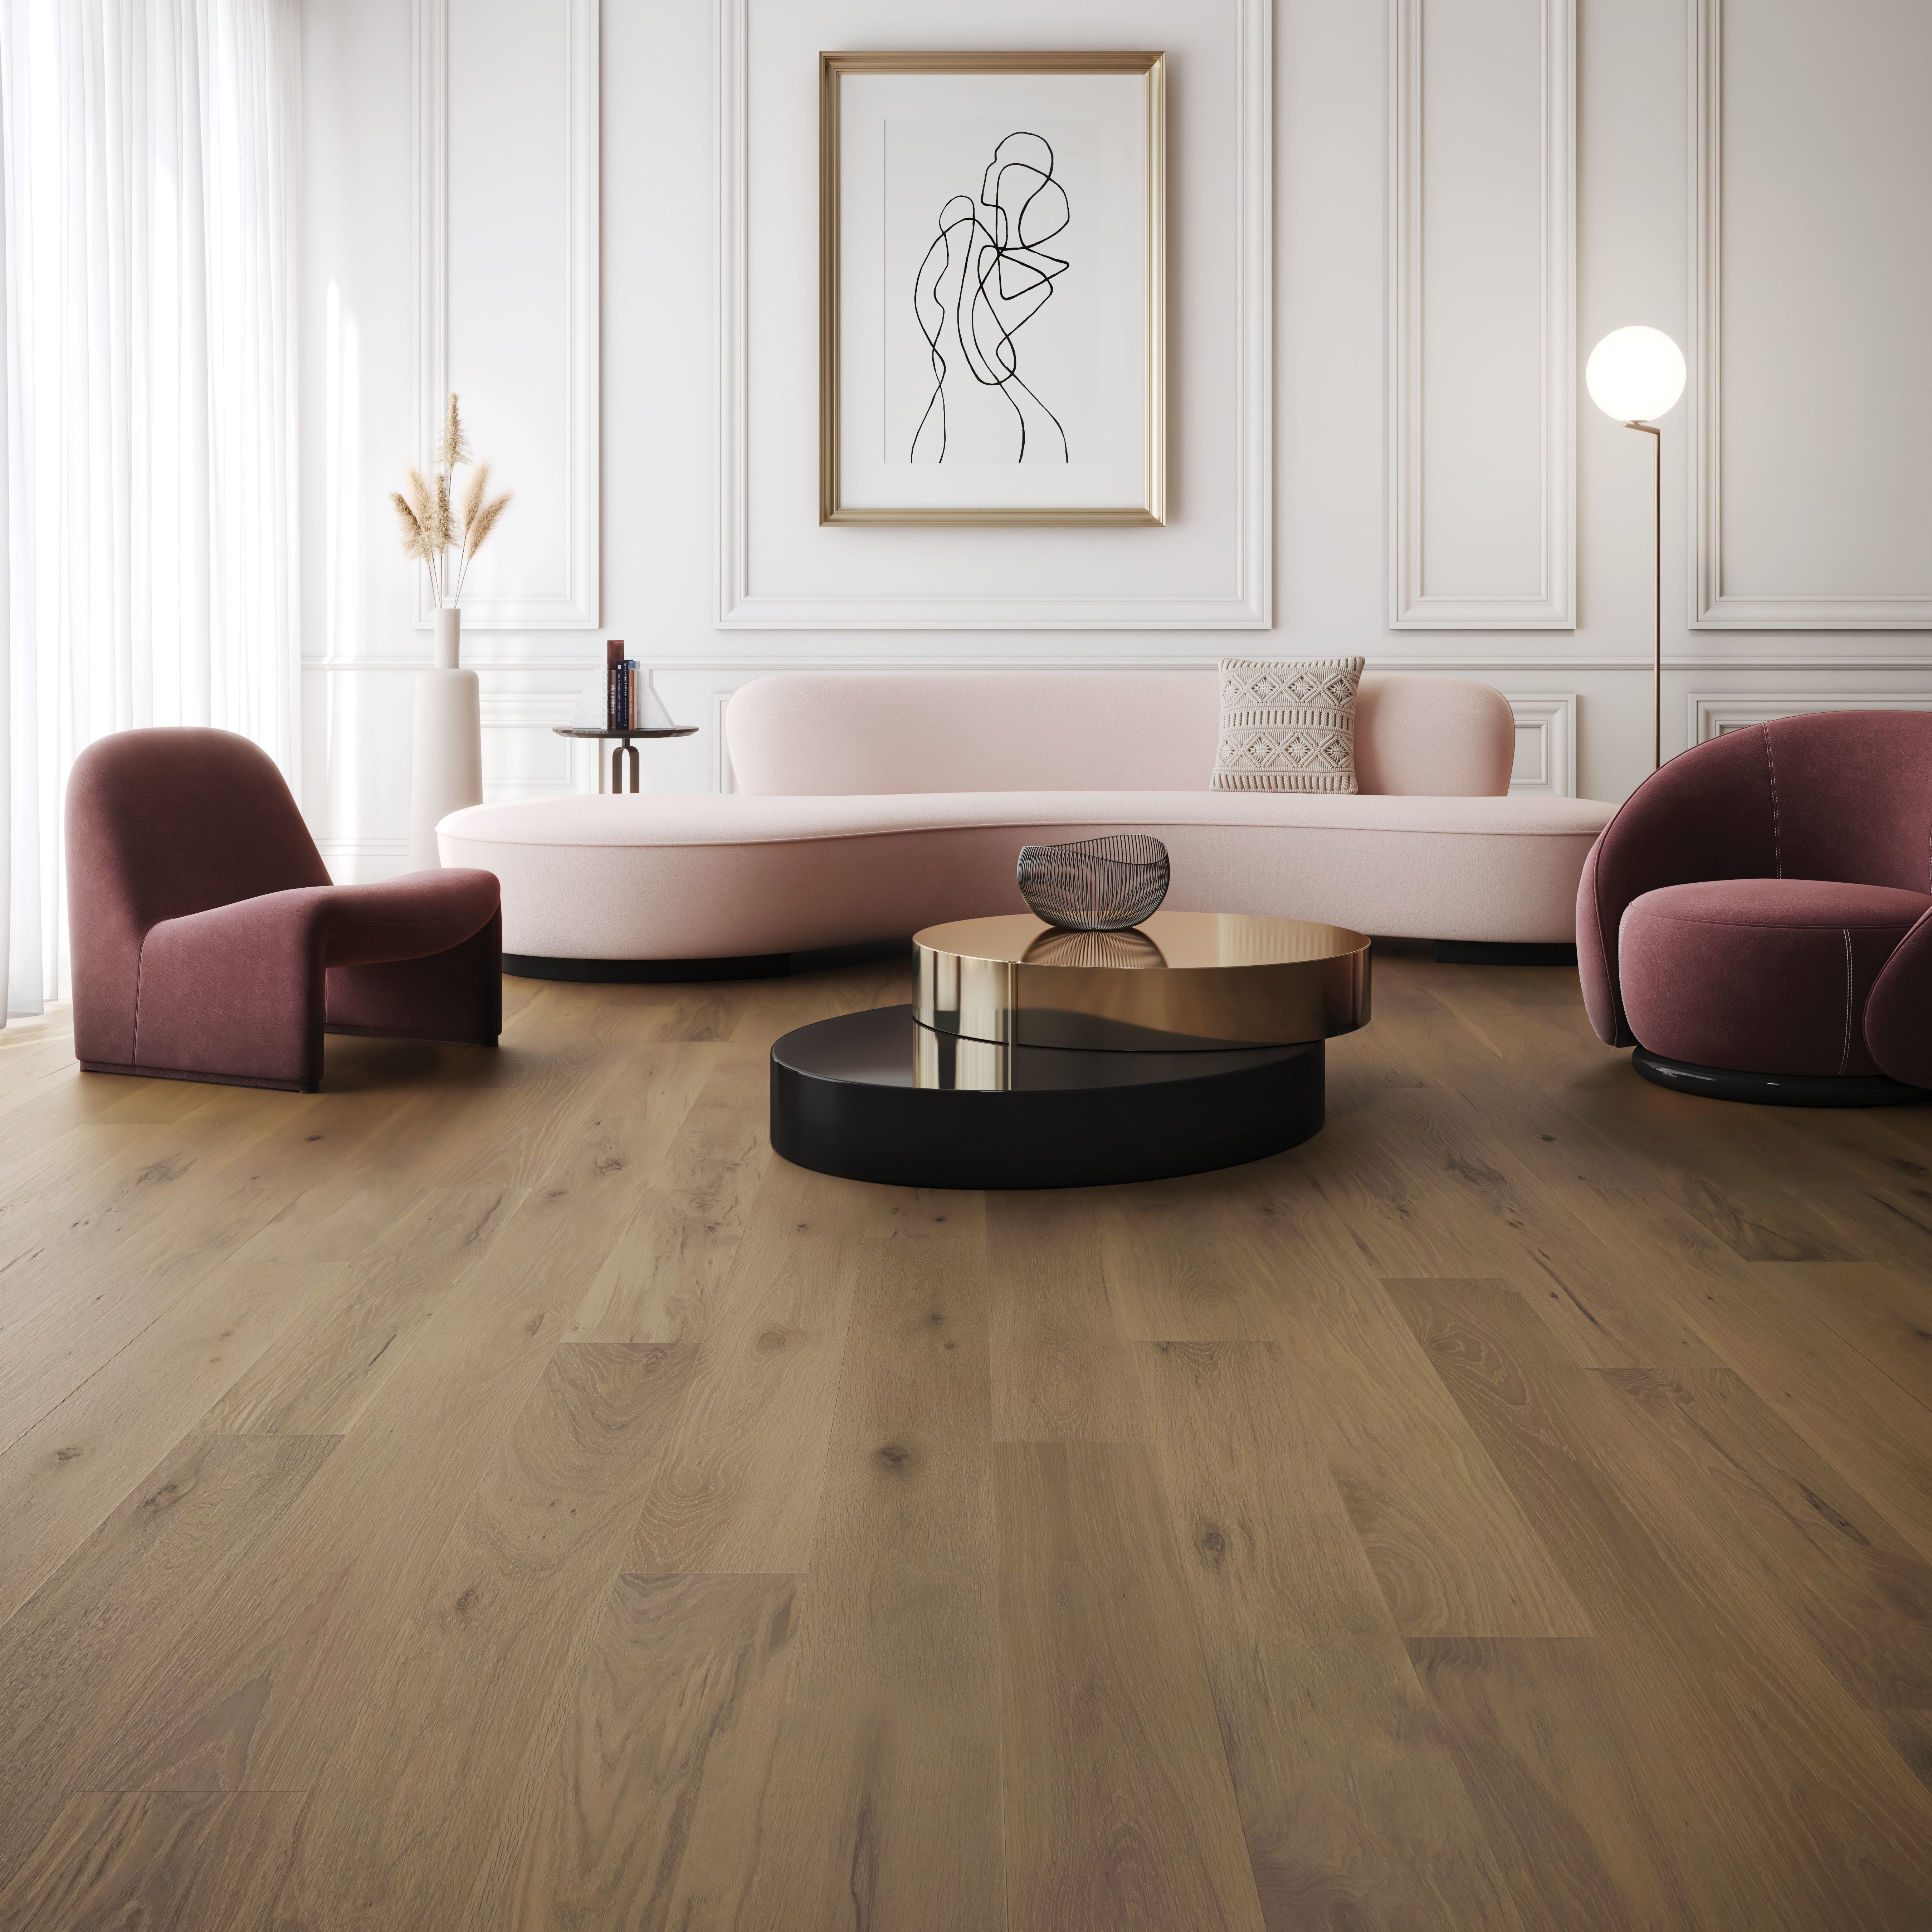 White Oak Hattie Character Brushed - Ambience image